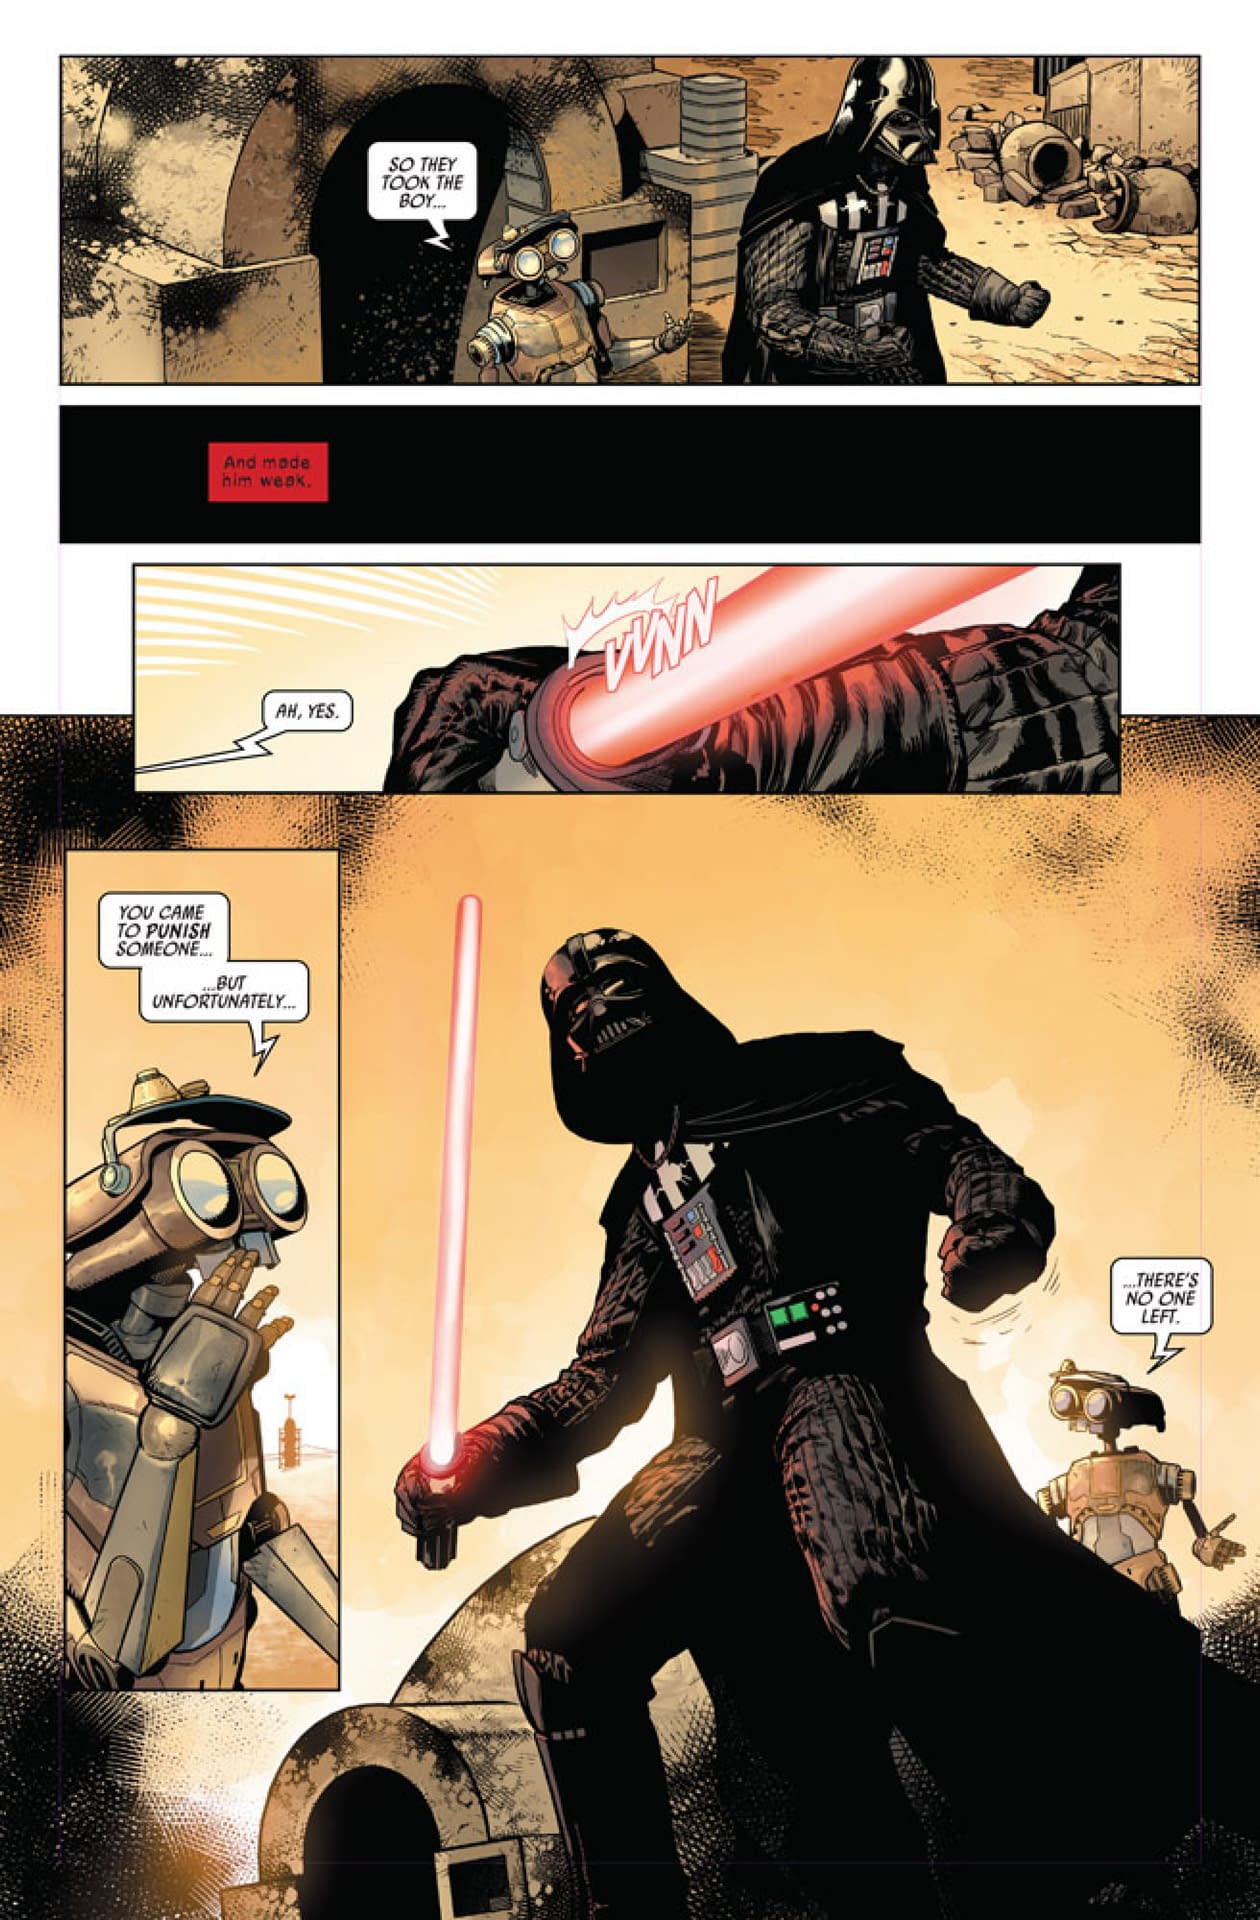 Darth Vader Haunted by Images of the Star Wars Prequels in New Darth Vader #1 [Preview]